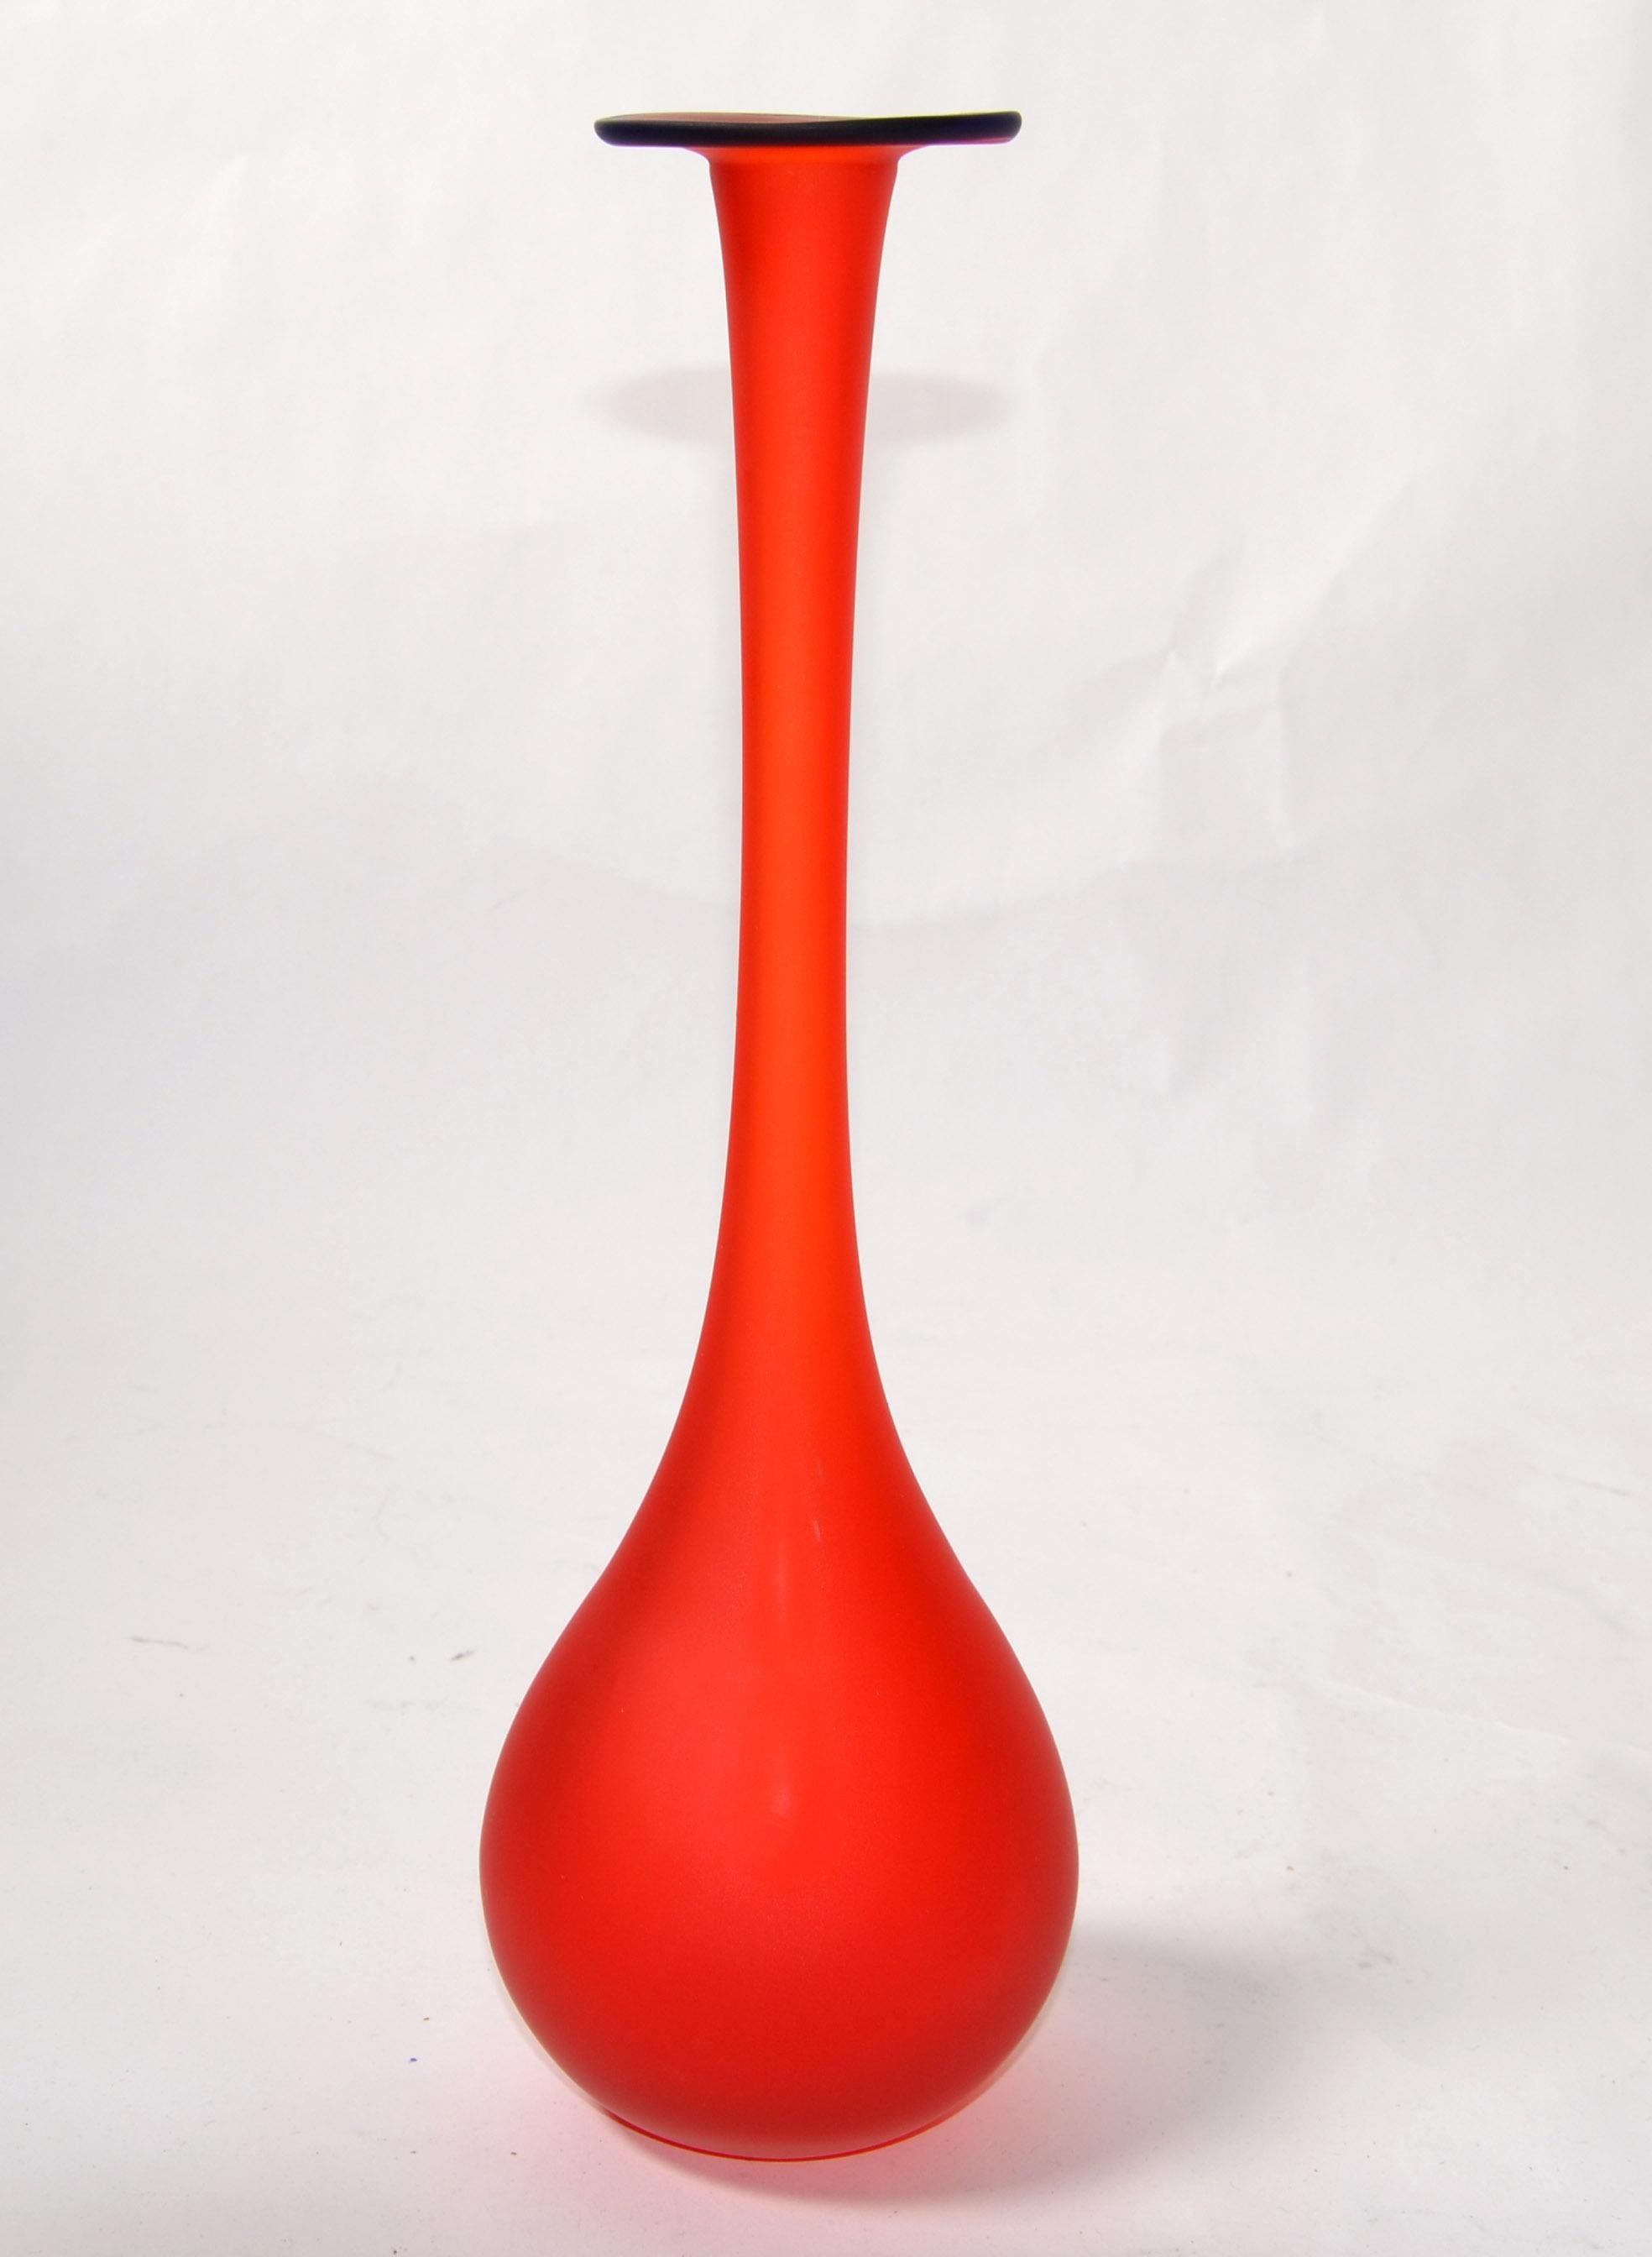 Carlo Moretti Style Mid-Century Modern satin glass bud vase, vessel in translucent red with a blue opening.
Very beautiful and clean design.
Opening measures: 0.75 Inches.